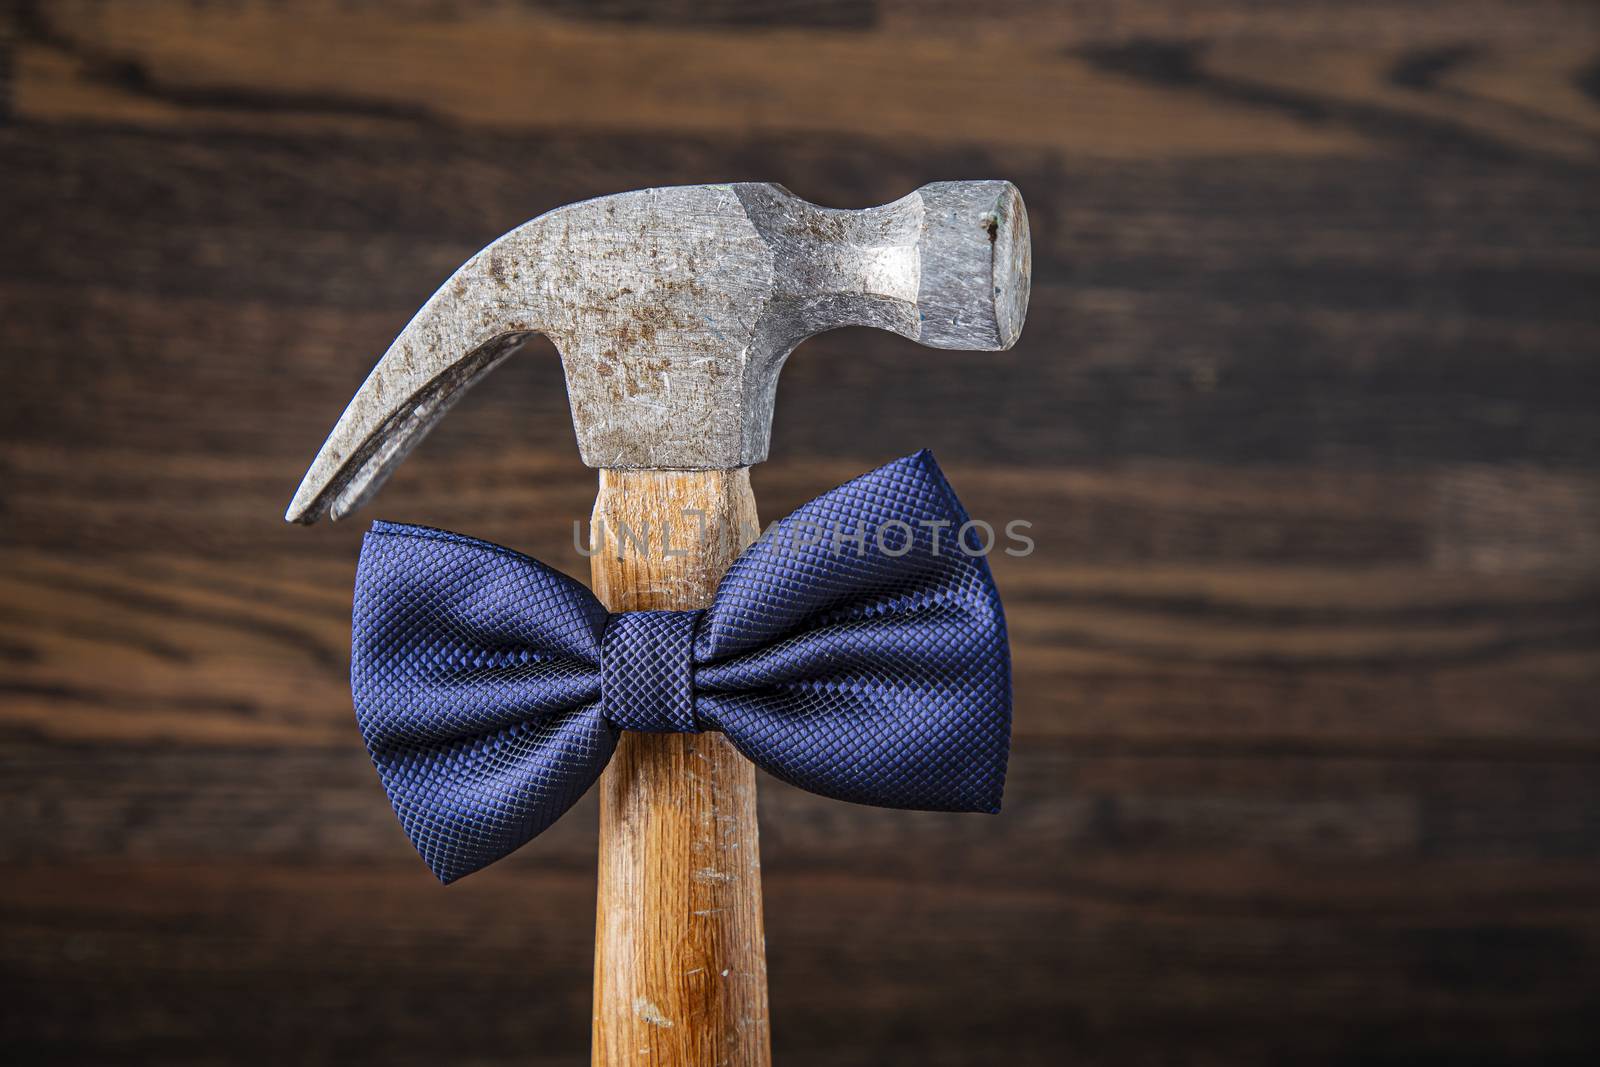 Old hammer with wood handle, wearing a blue bow tie, against a dark wood background